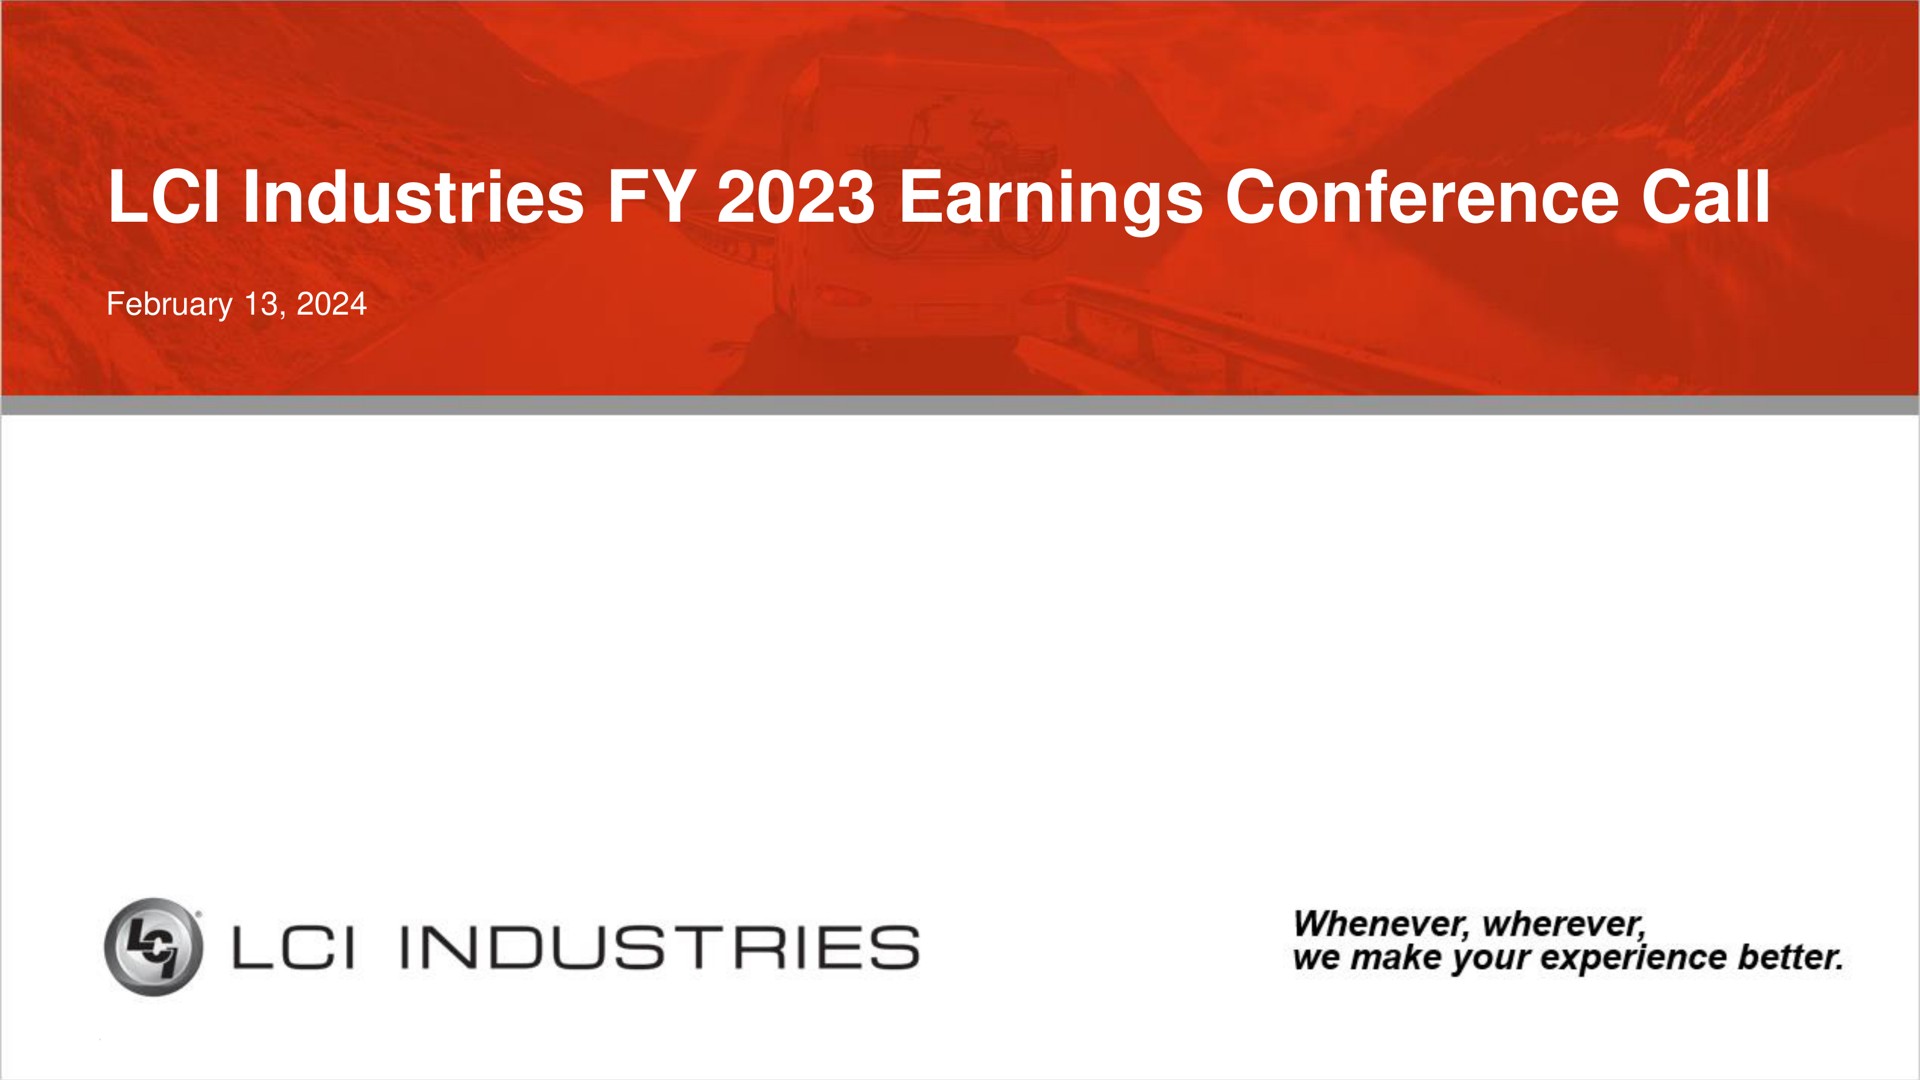 industries earnings conference call | LCI Industries